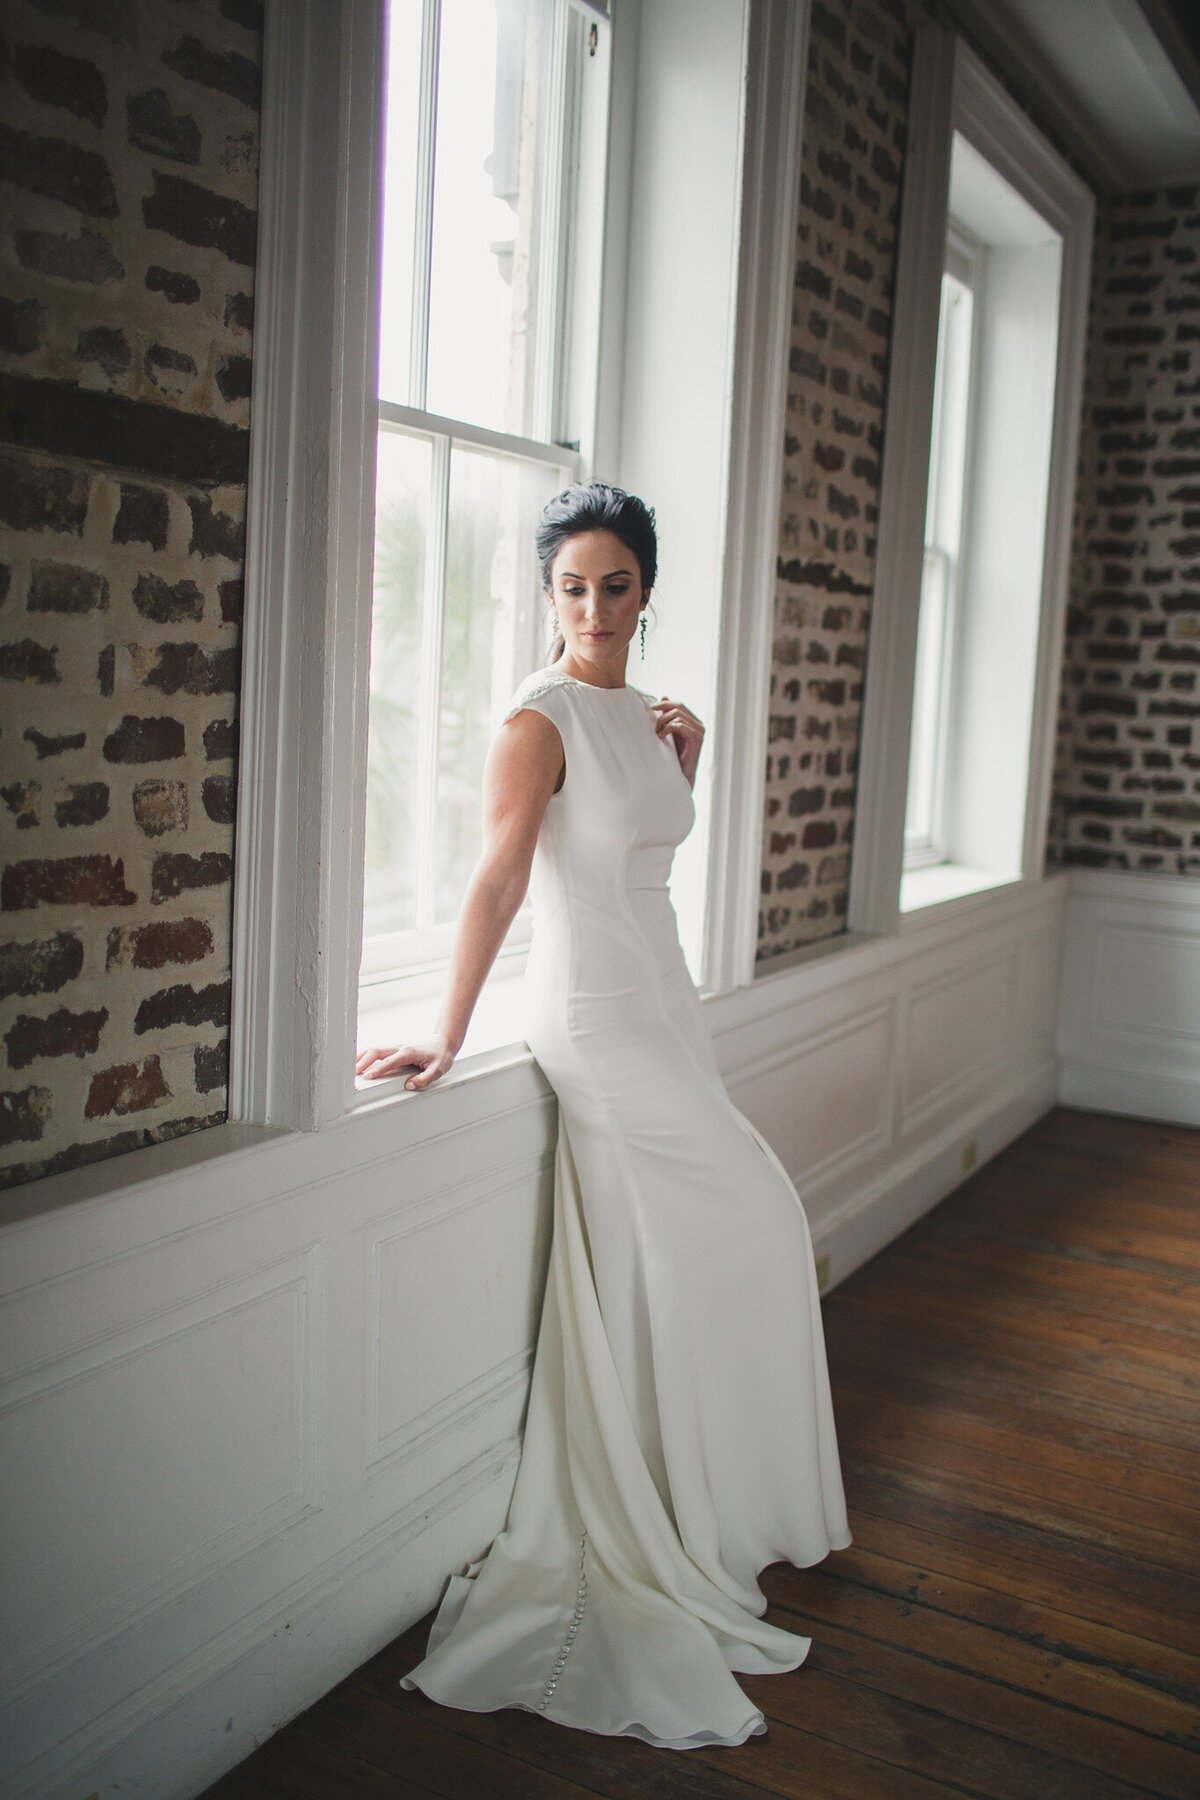 The clean lines and subtle sparkle details of the Tamarisk crepe wedding gown make this a timeless bridal style.